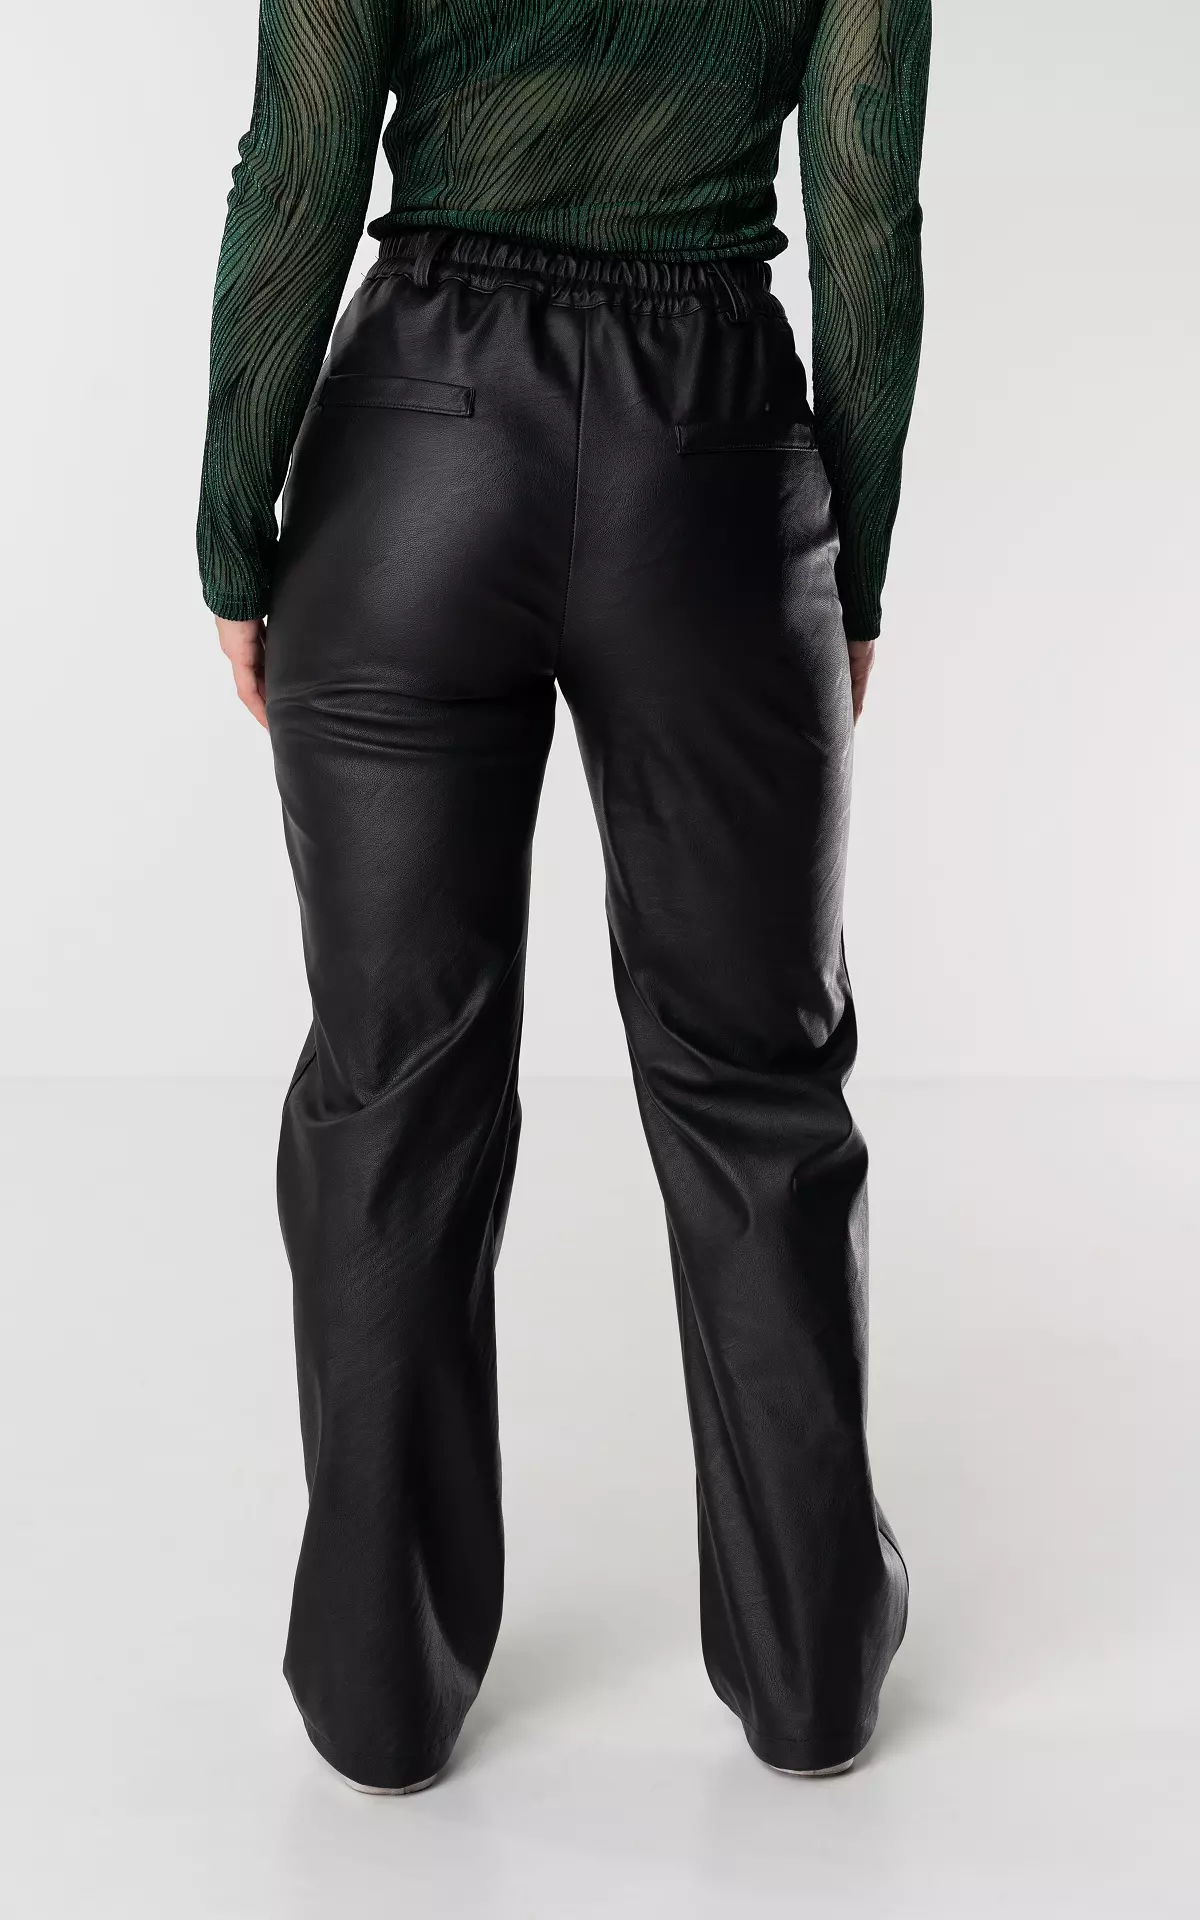 THE LEADING FAUX LEATHER STRAIGHT LEG PANT – STYLE ON THE GO